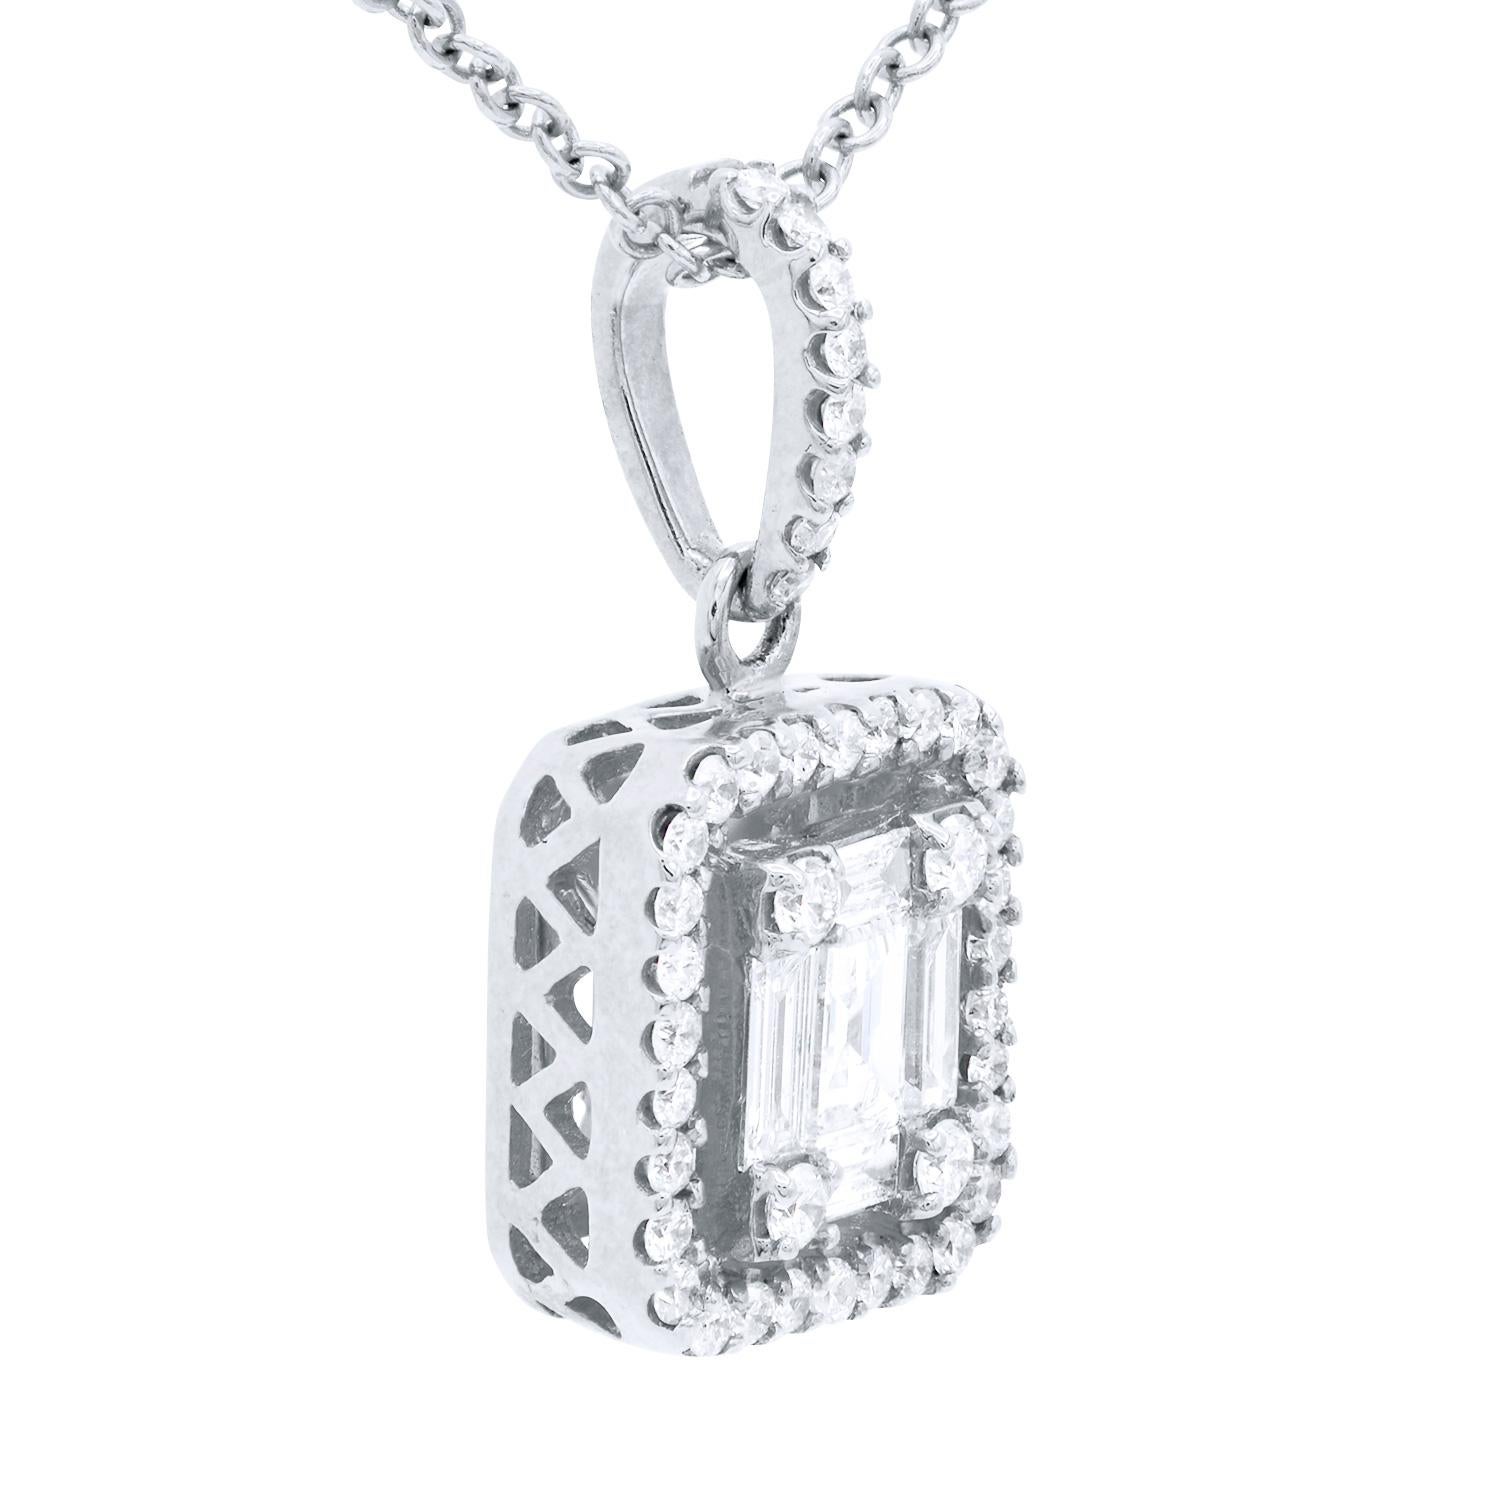 This unique and beautiful pendant looks like an emerald-cut diamond but is actually made of smaller diamonds to appear in an emerald shape. It is then surrounded by a round diamond halo and hung from a diamond-covered bail. There are 5 baguette